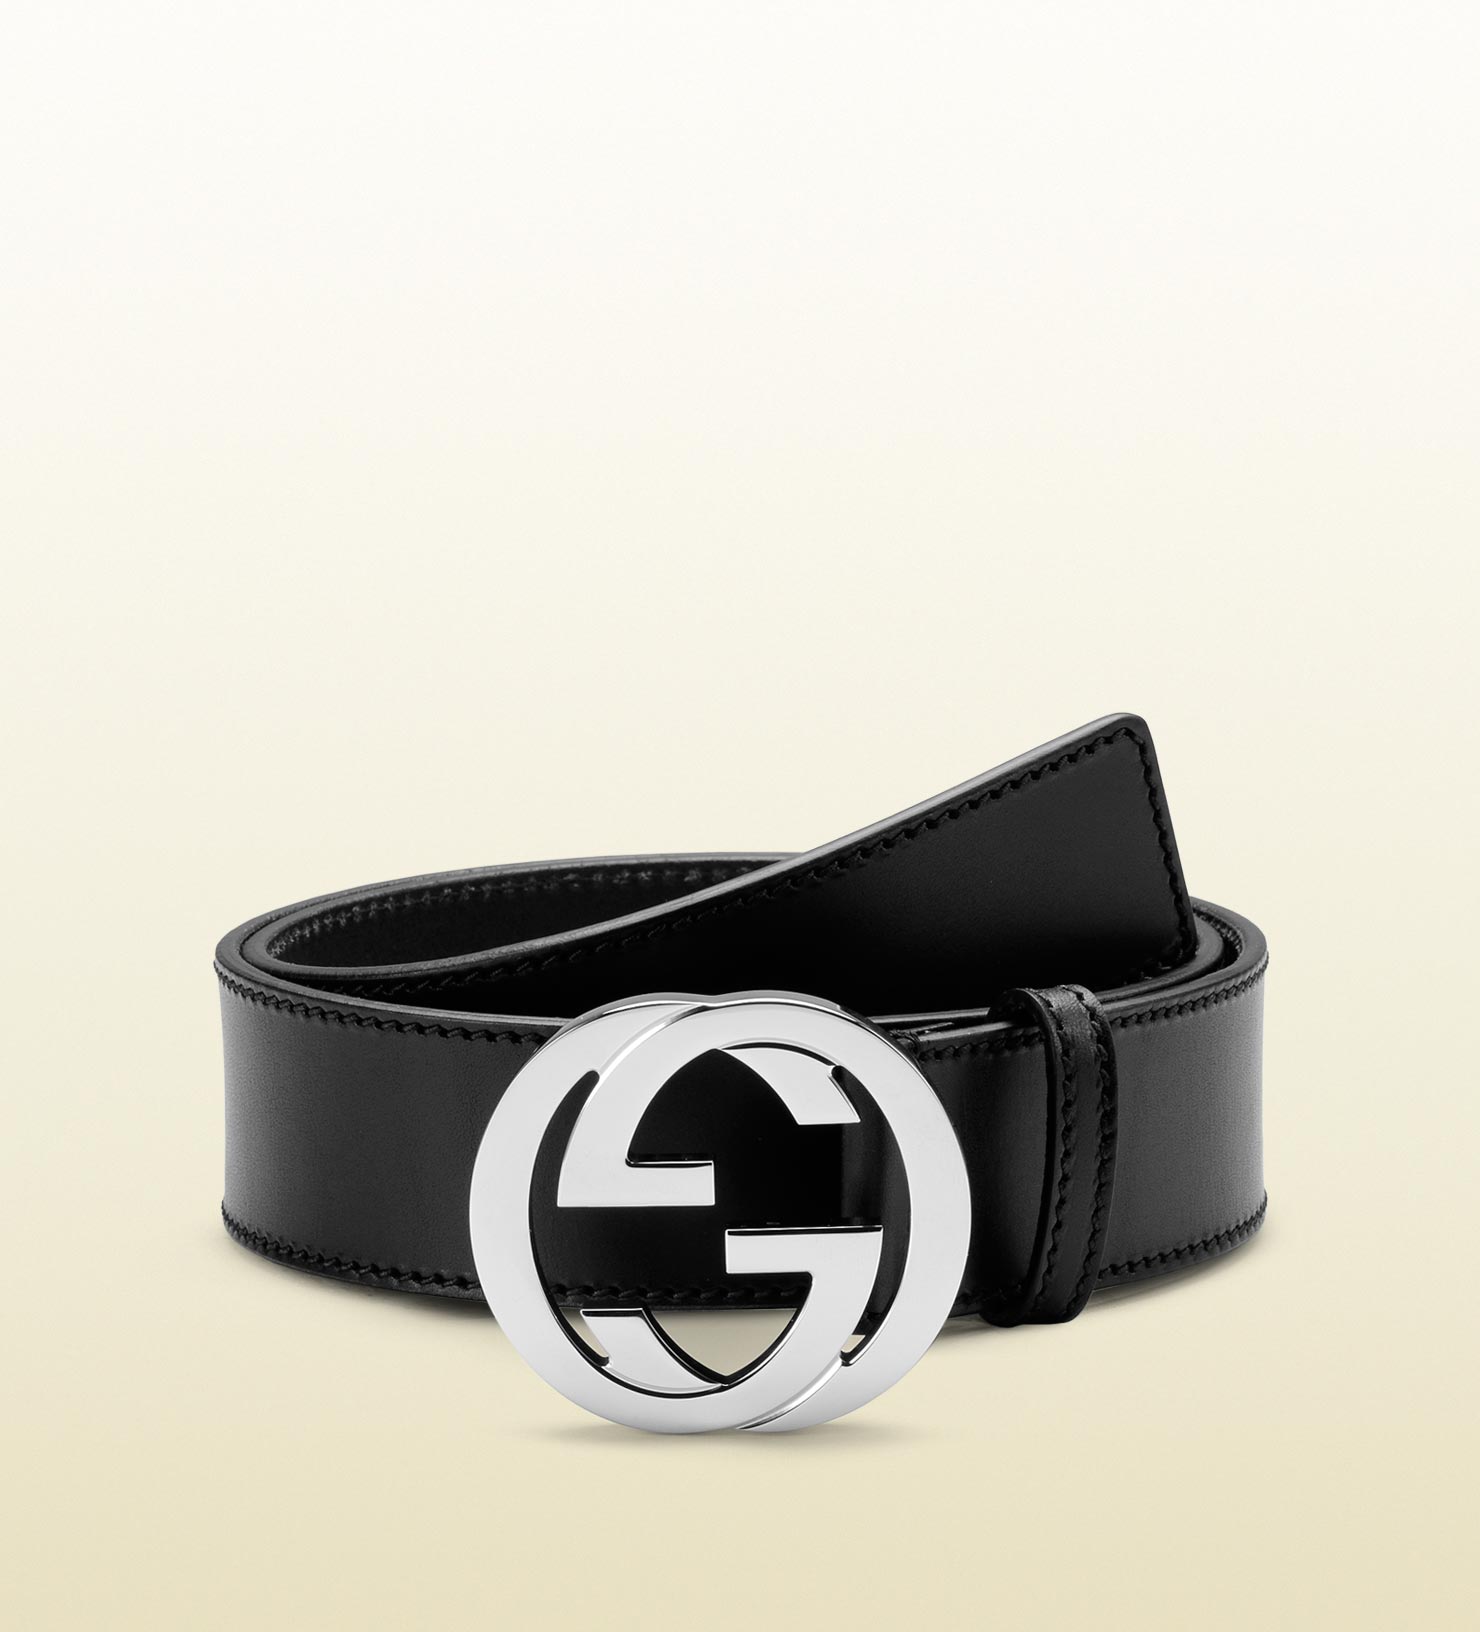 Lyst - Gucci Leather Belt With Interlocking G Buckle in Black for Men